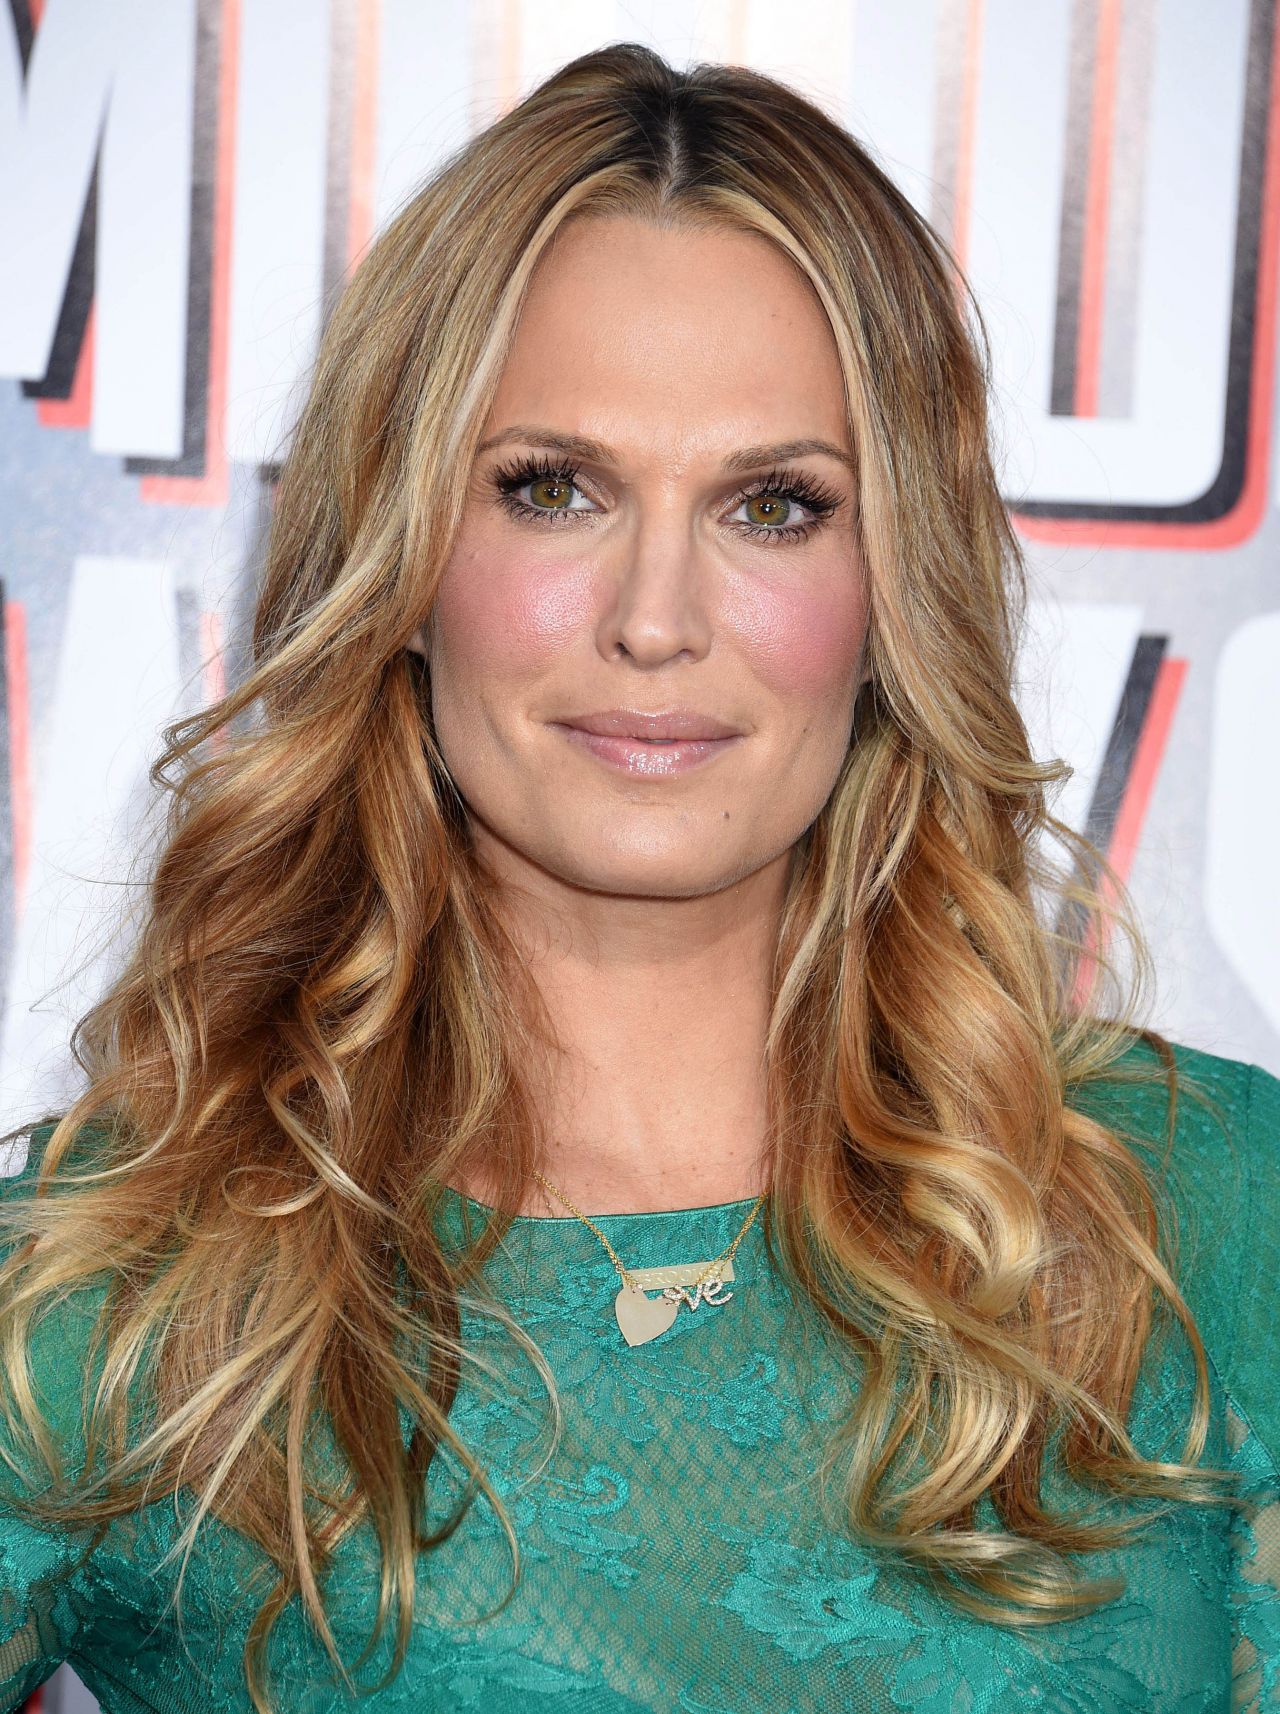 Molly Sims on Red Carpet - 'A Million Ways To Die In The West' Premiere in Westwood1280 x 1714